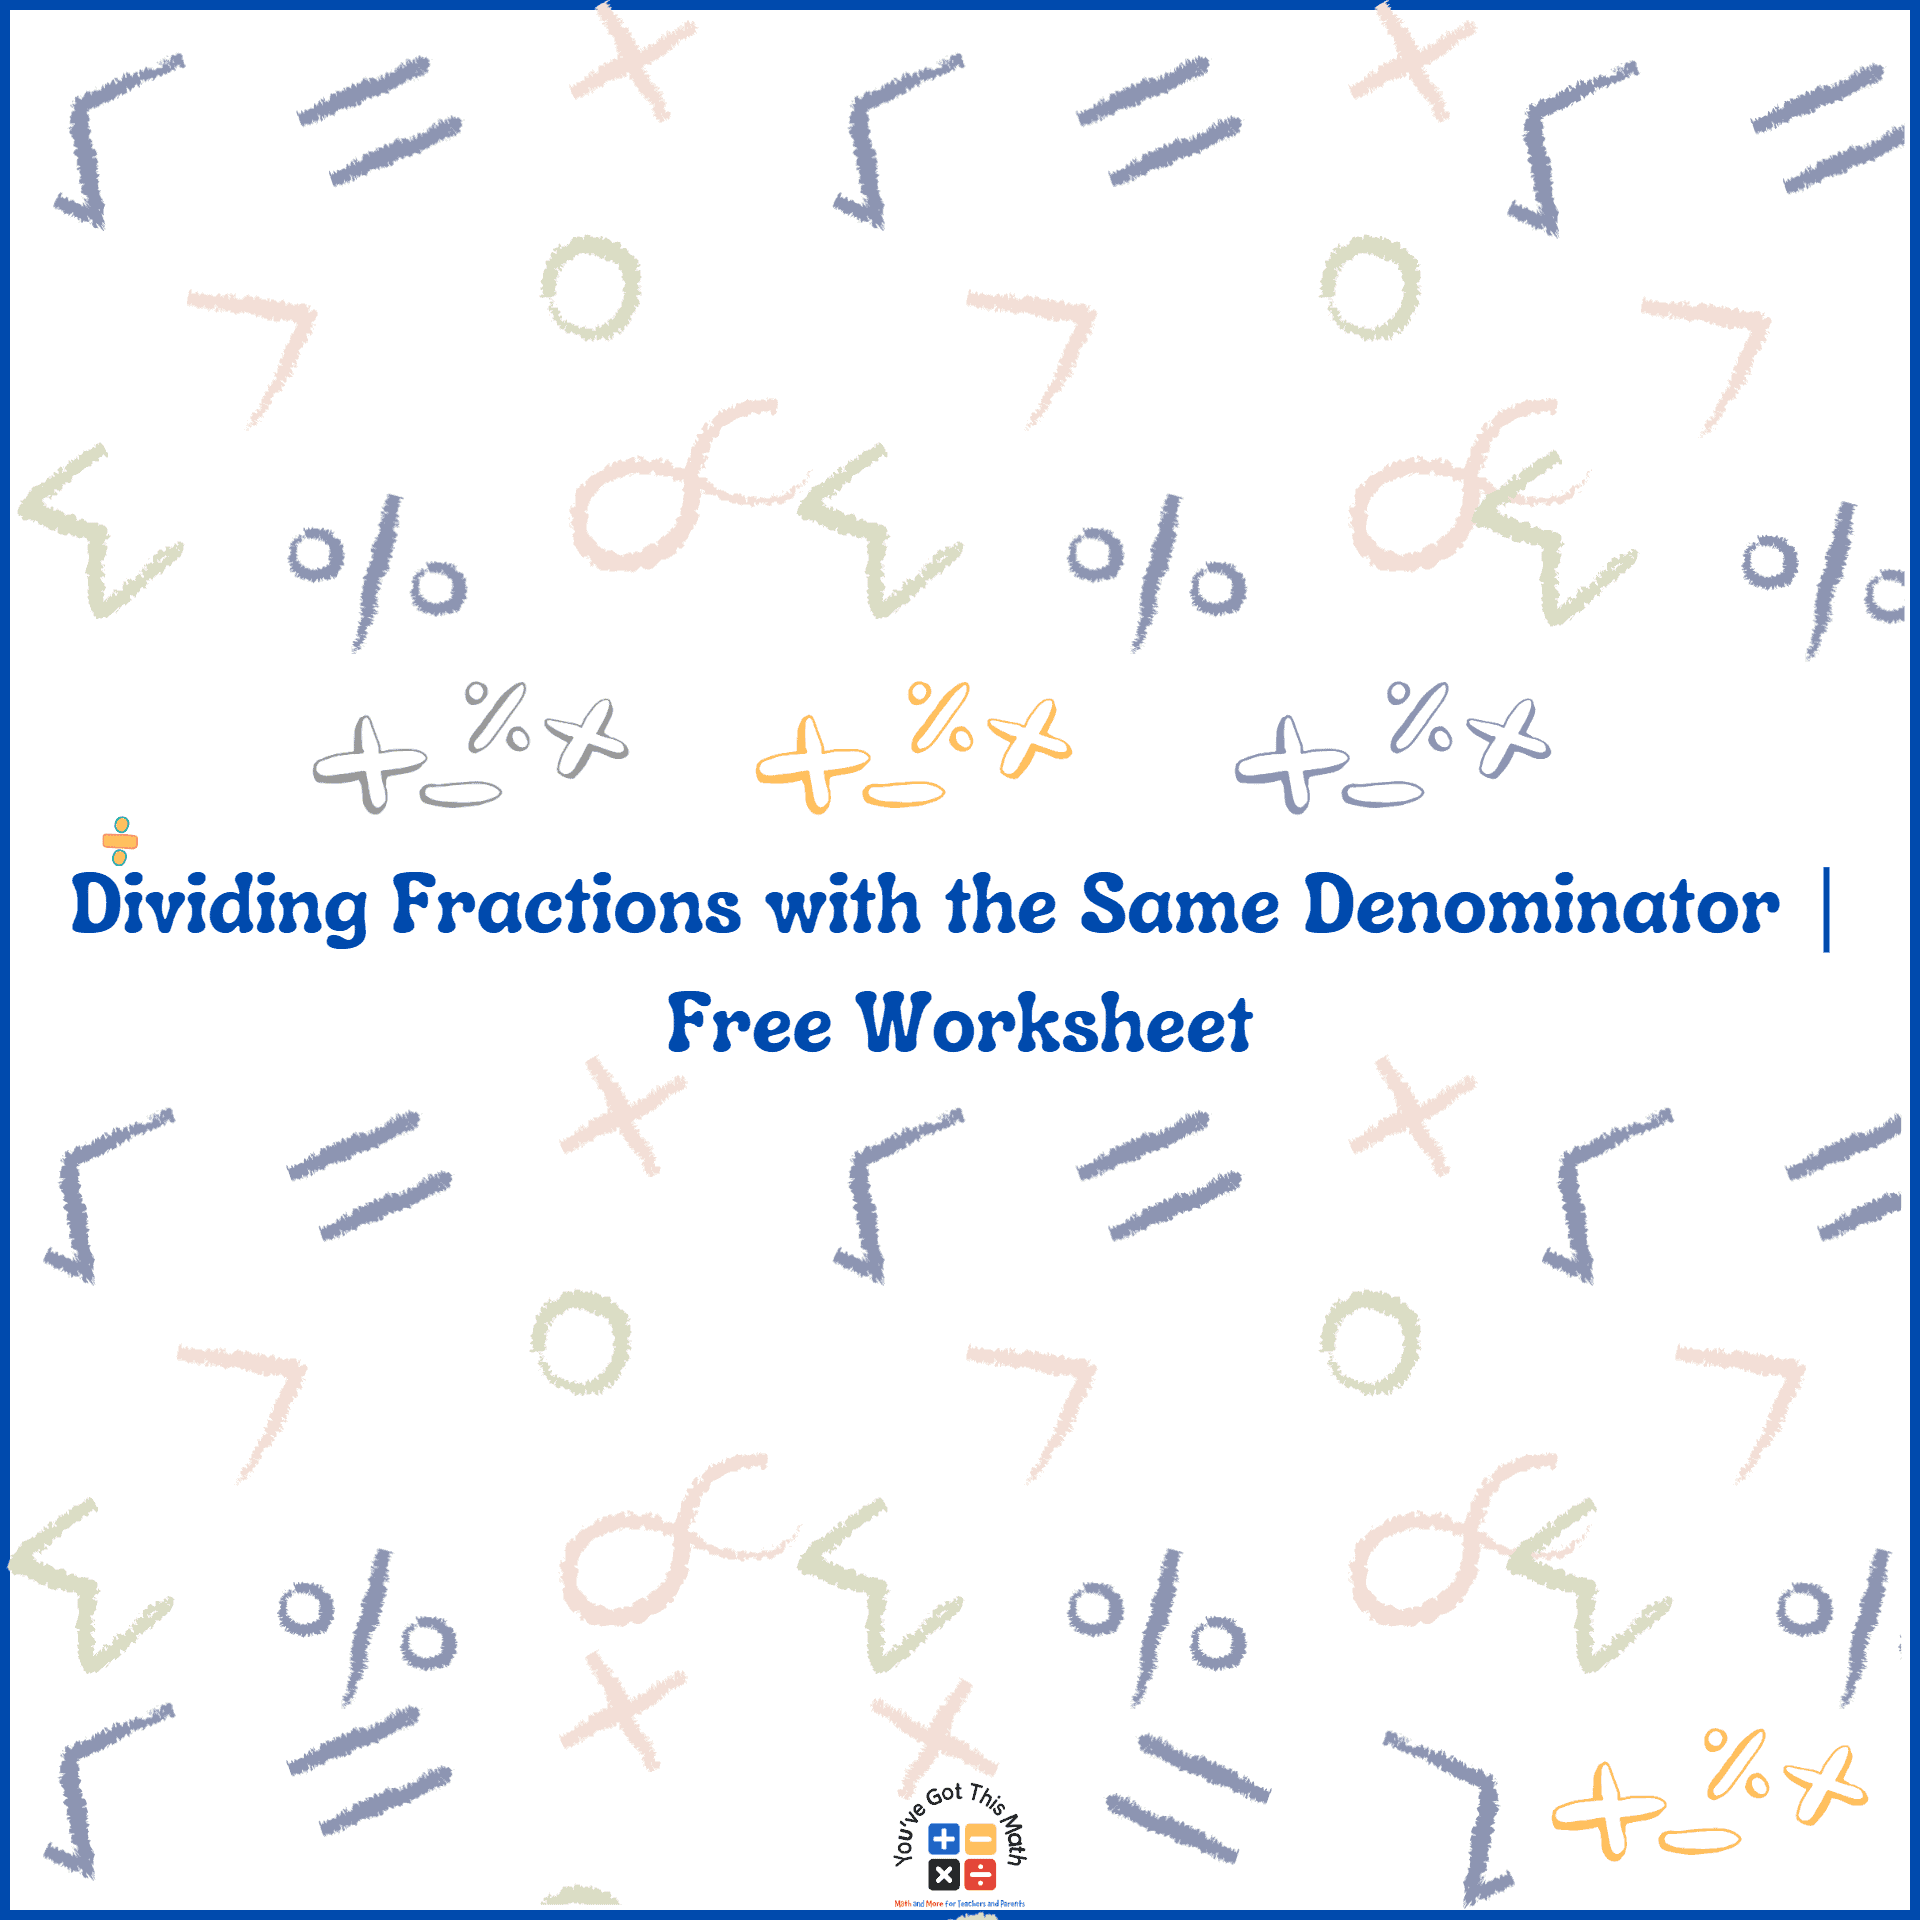 6 Free Dividing Fractions with the Same Denominator Worksheet